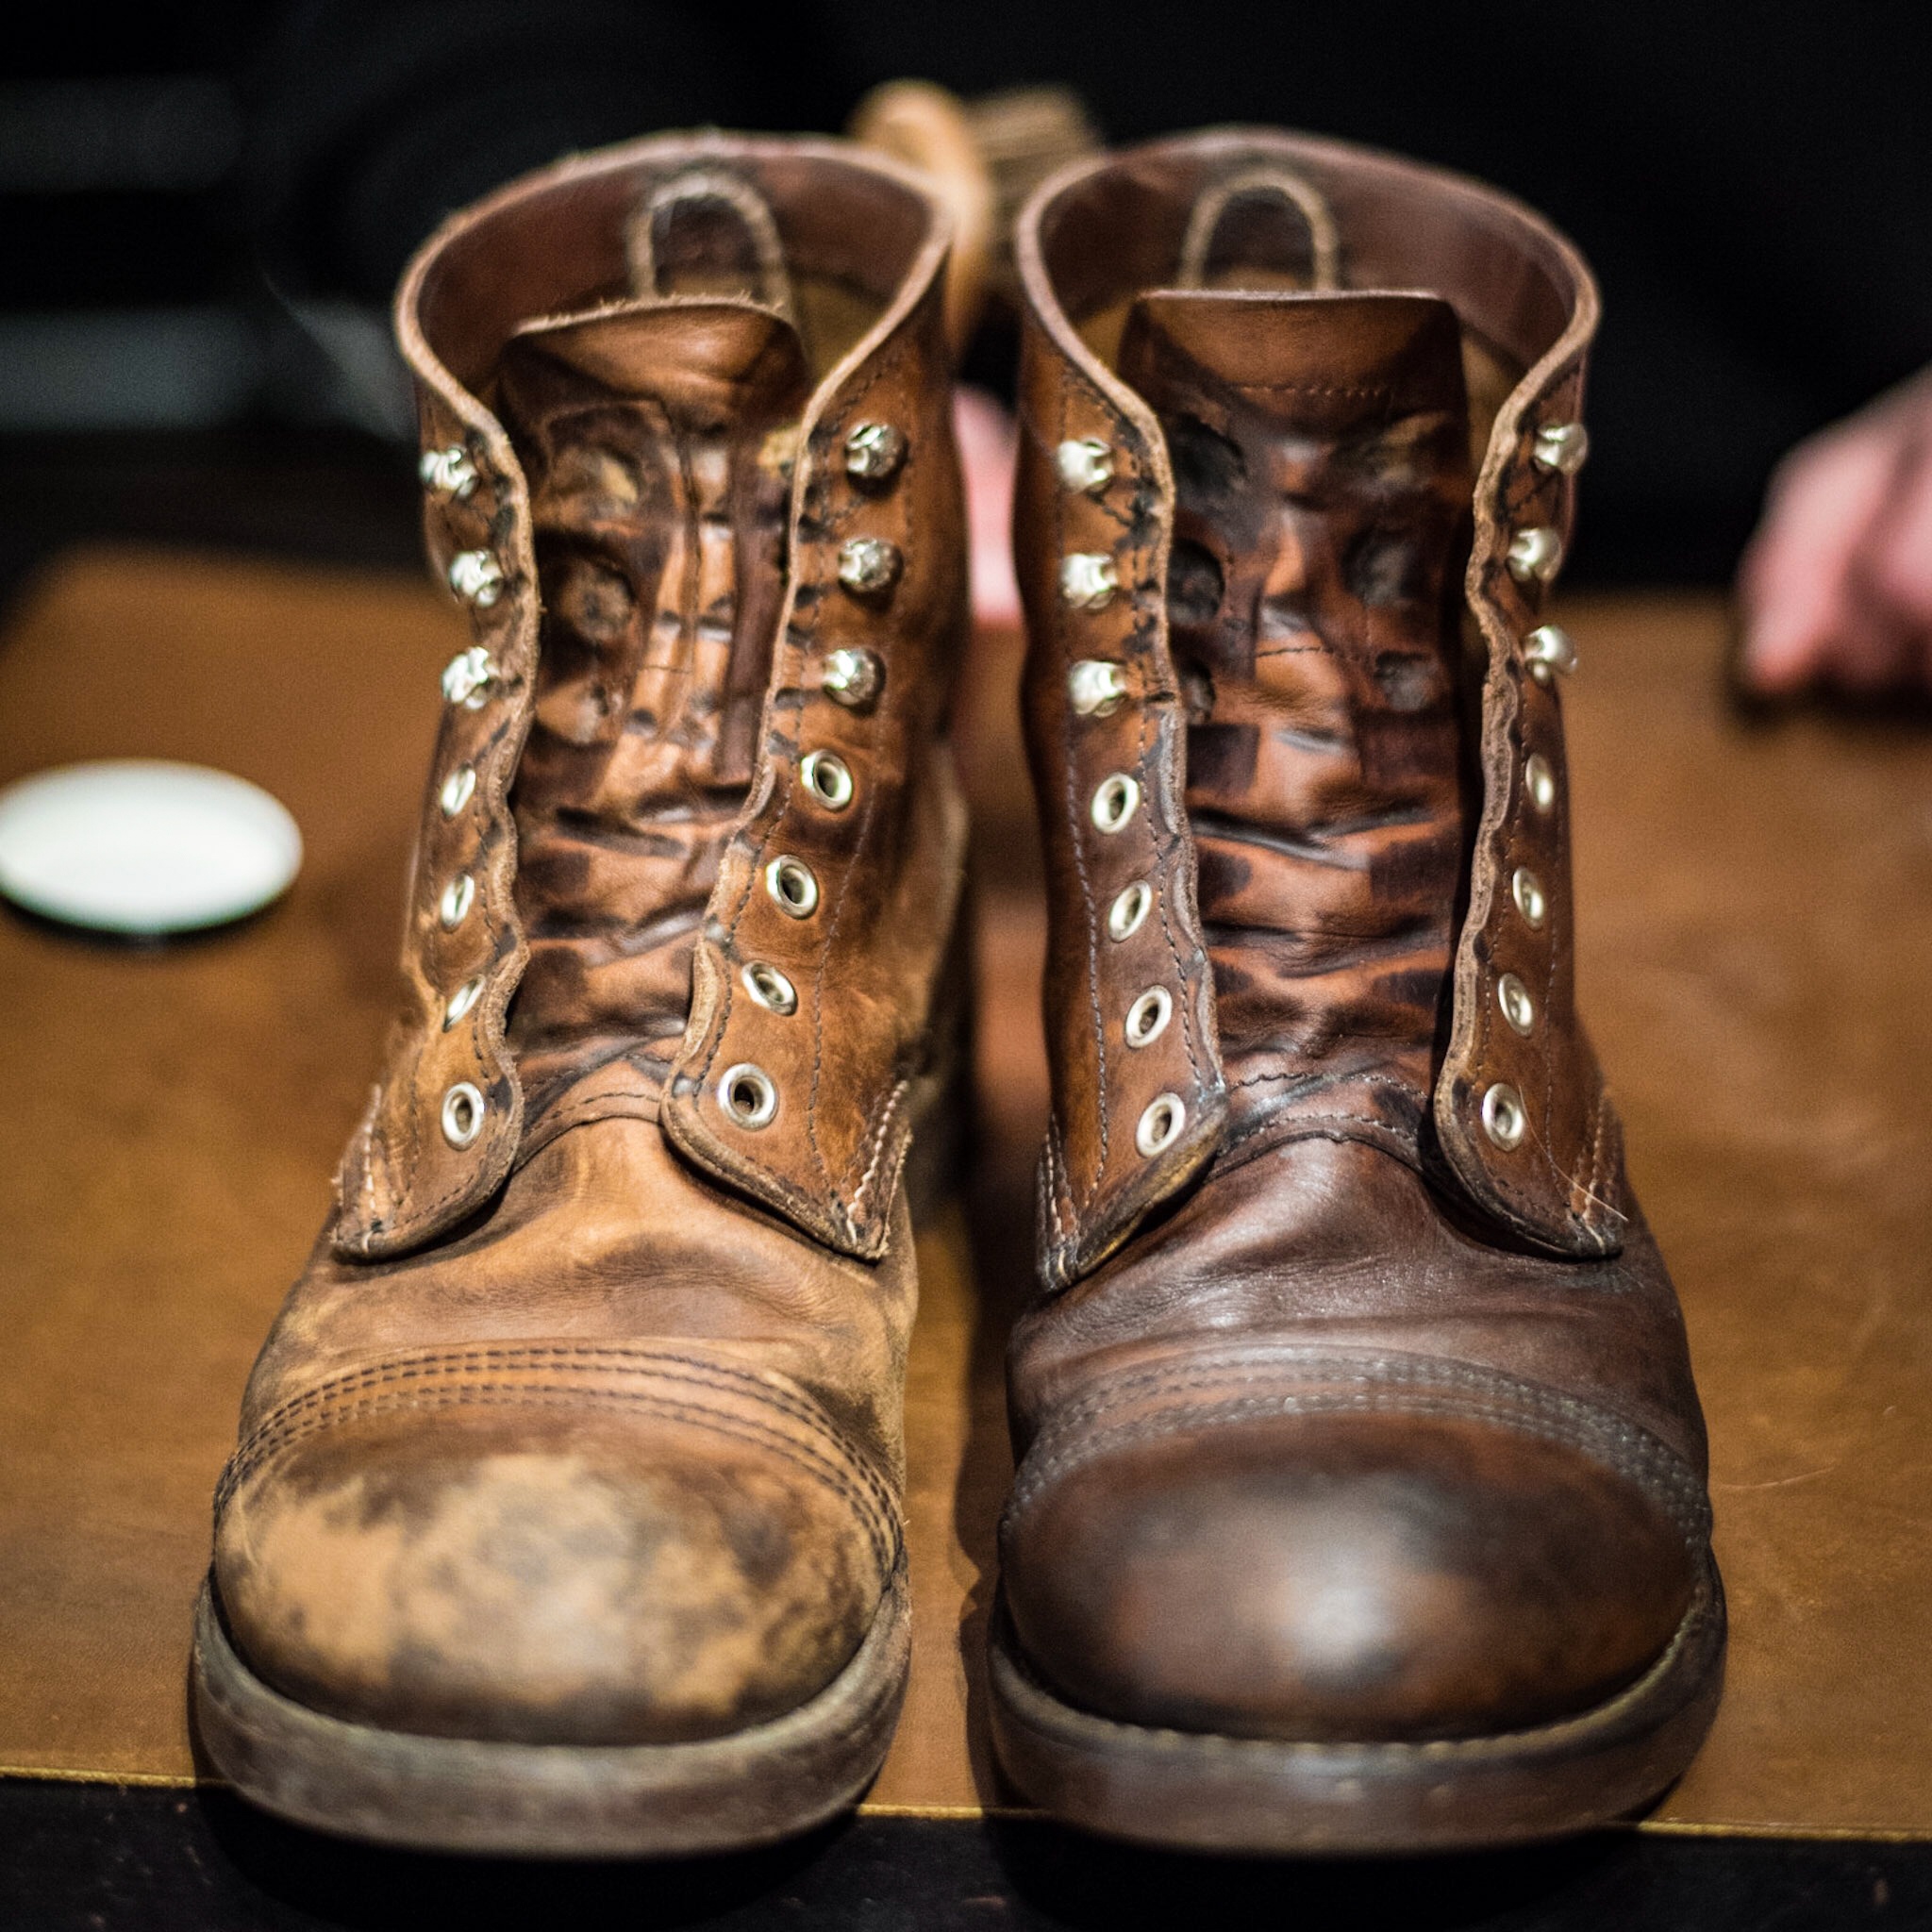 red wing 8111 care